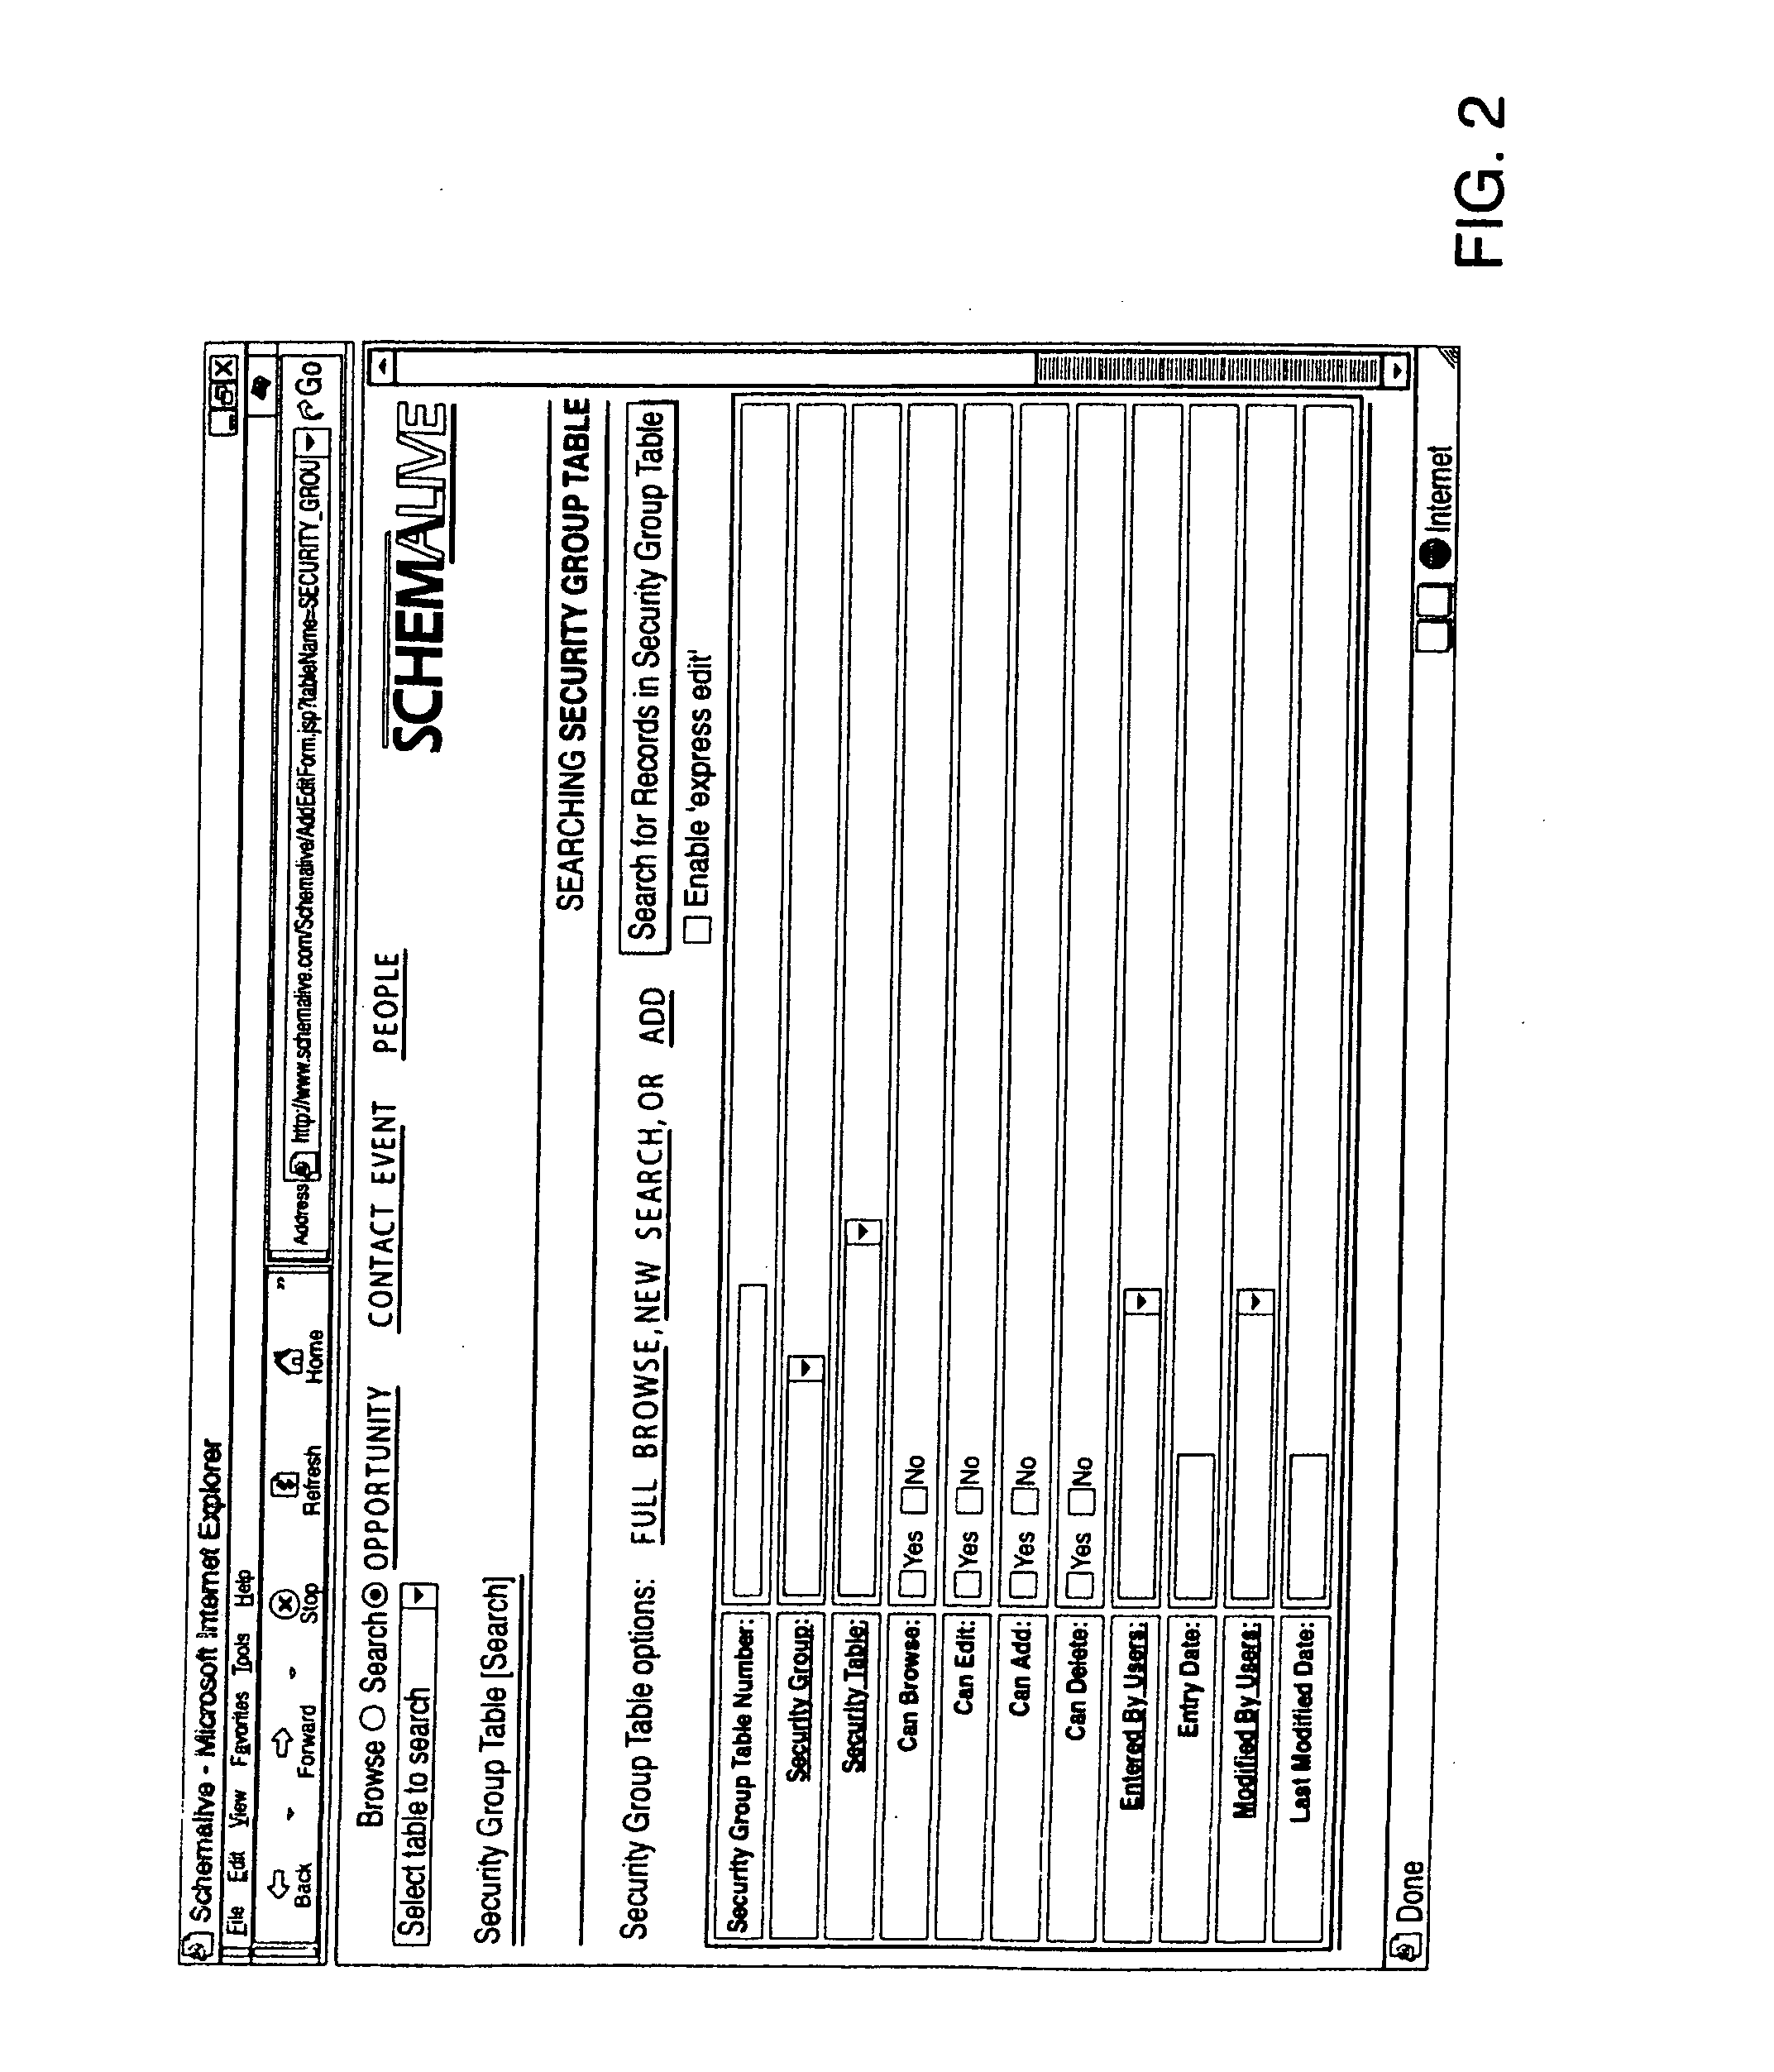 System and method for generating automatic user interface for arbitrarily complex or large databases